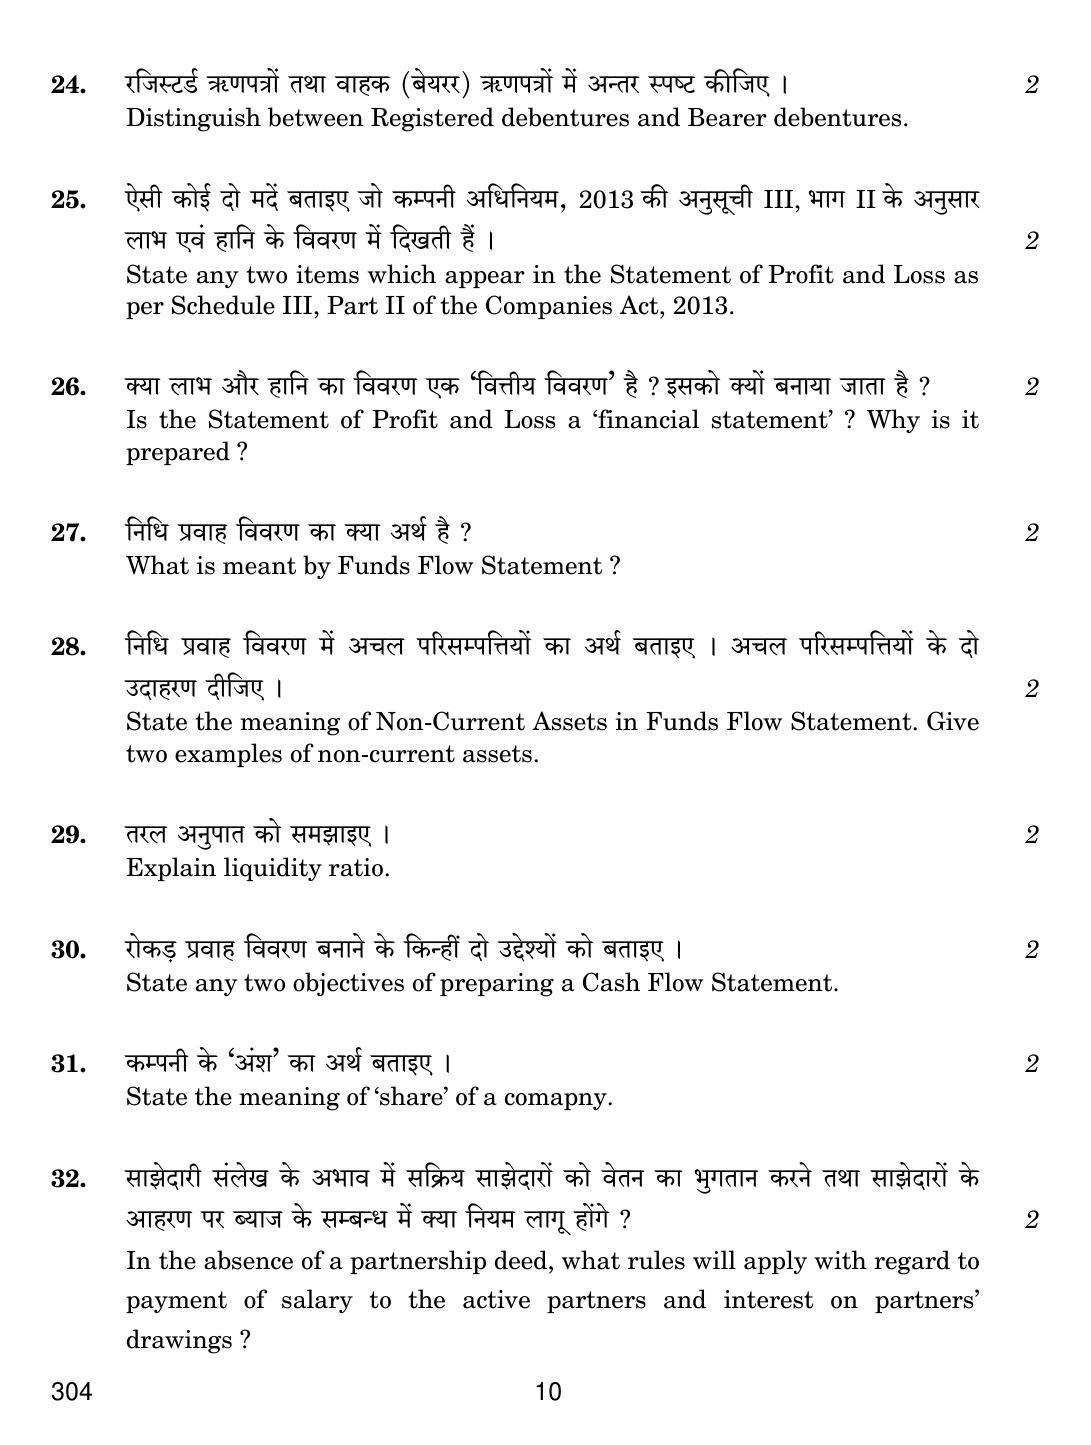 CBSE Class 12 304 FINANCIAL ACCOUNTING 2018 Question Paper - Page 10